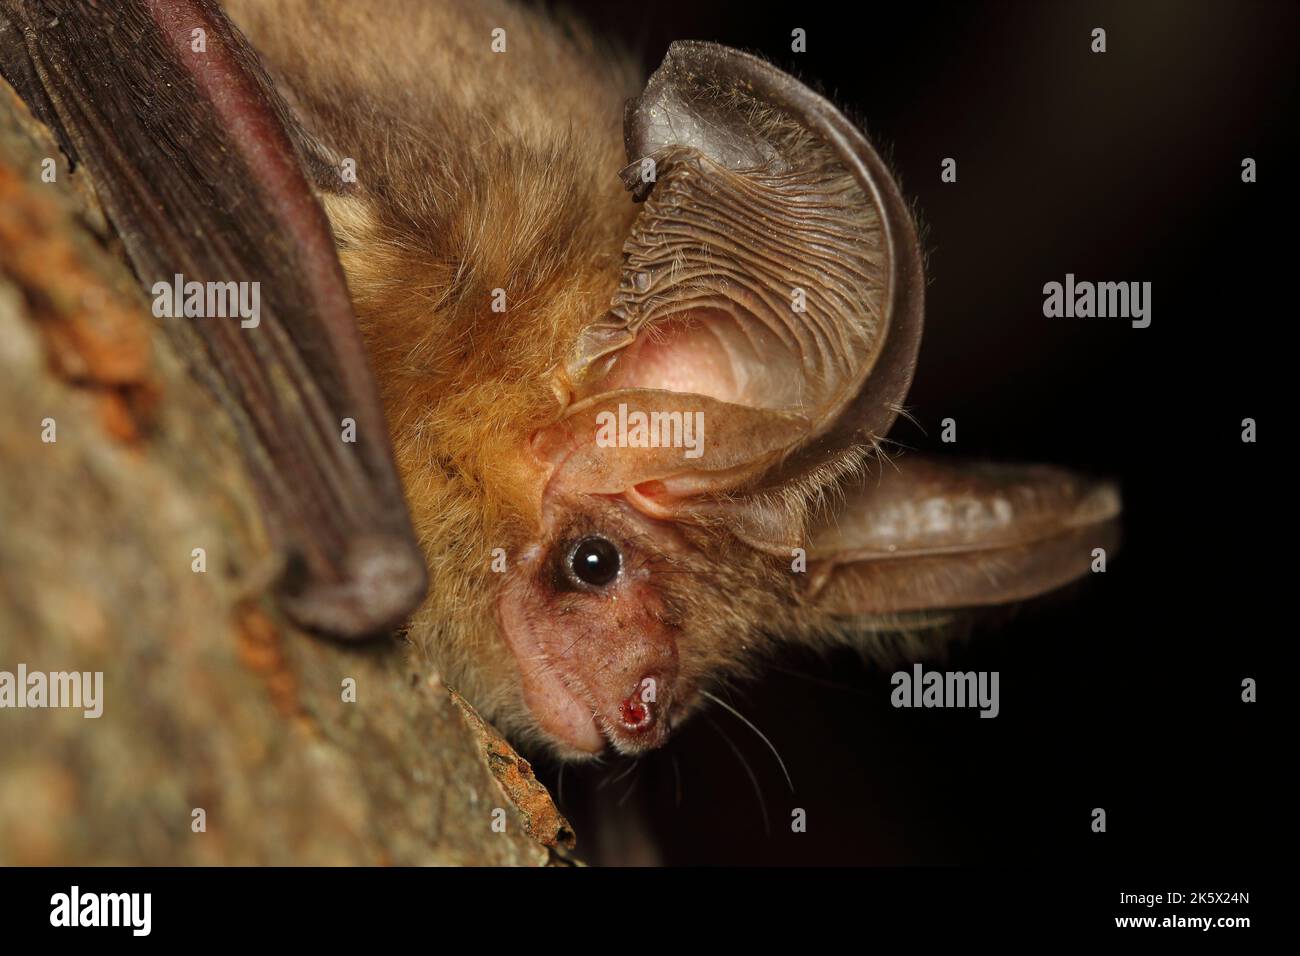 The brown long-eared bat or common long-eared bat (Plecotus auritus) on the tree branch in a natural habitat Stock Photo